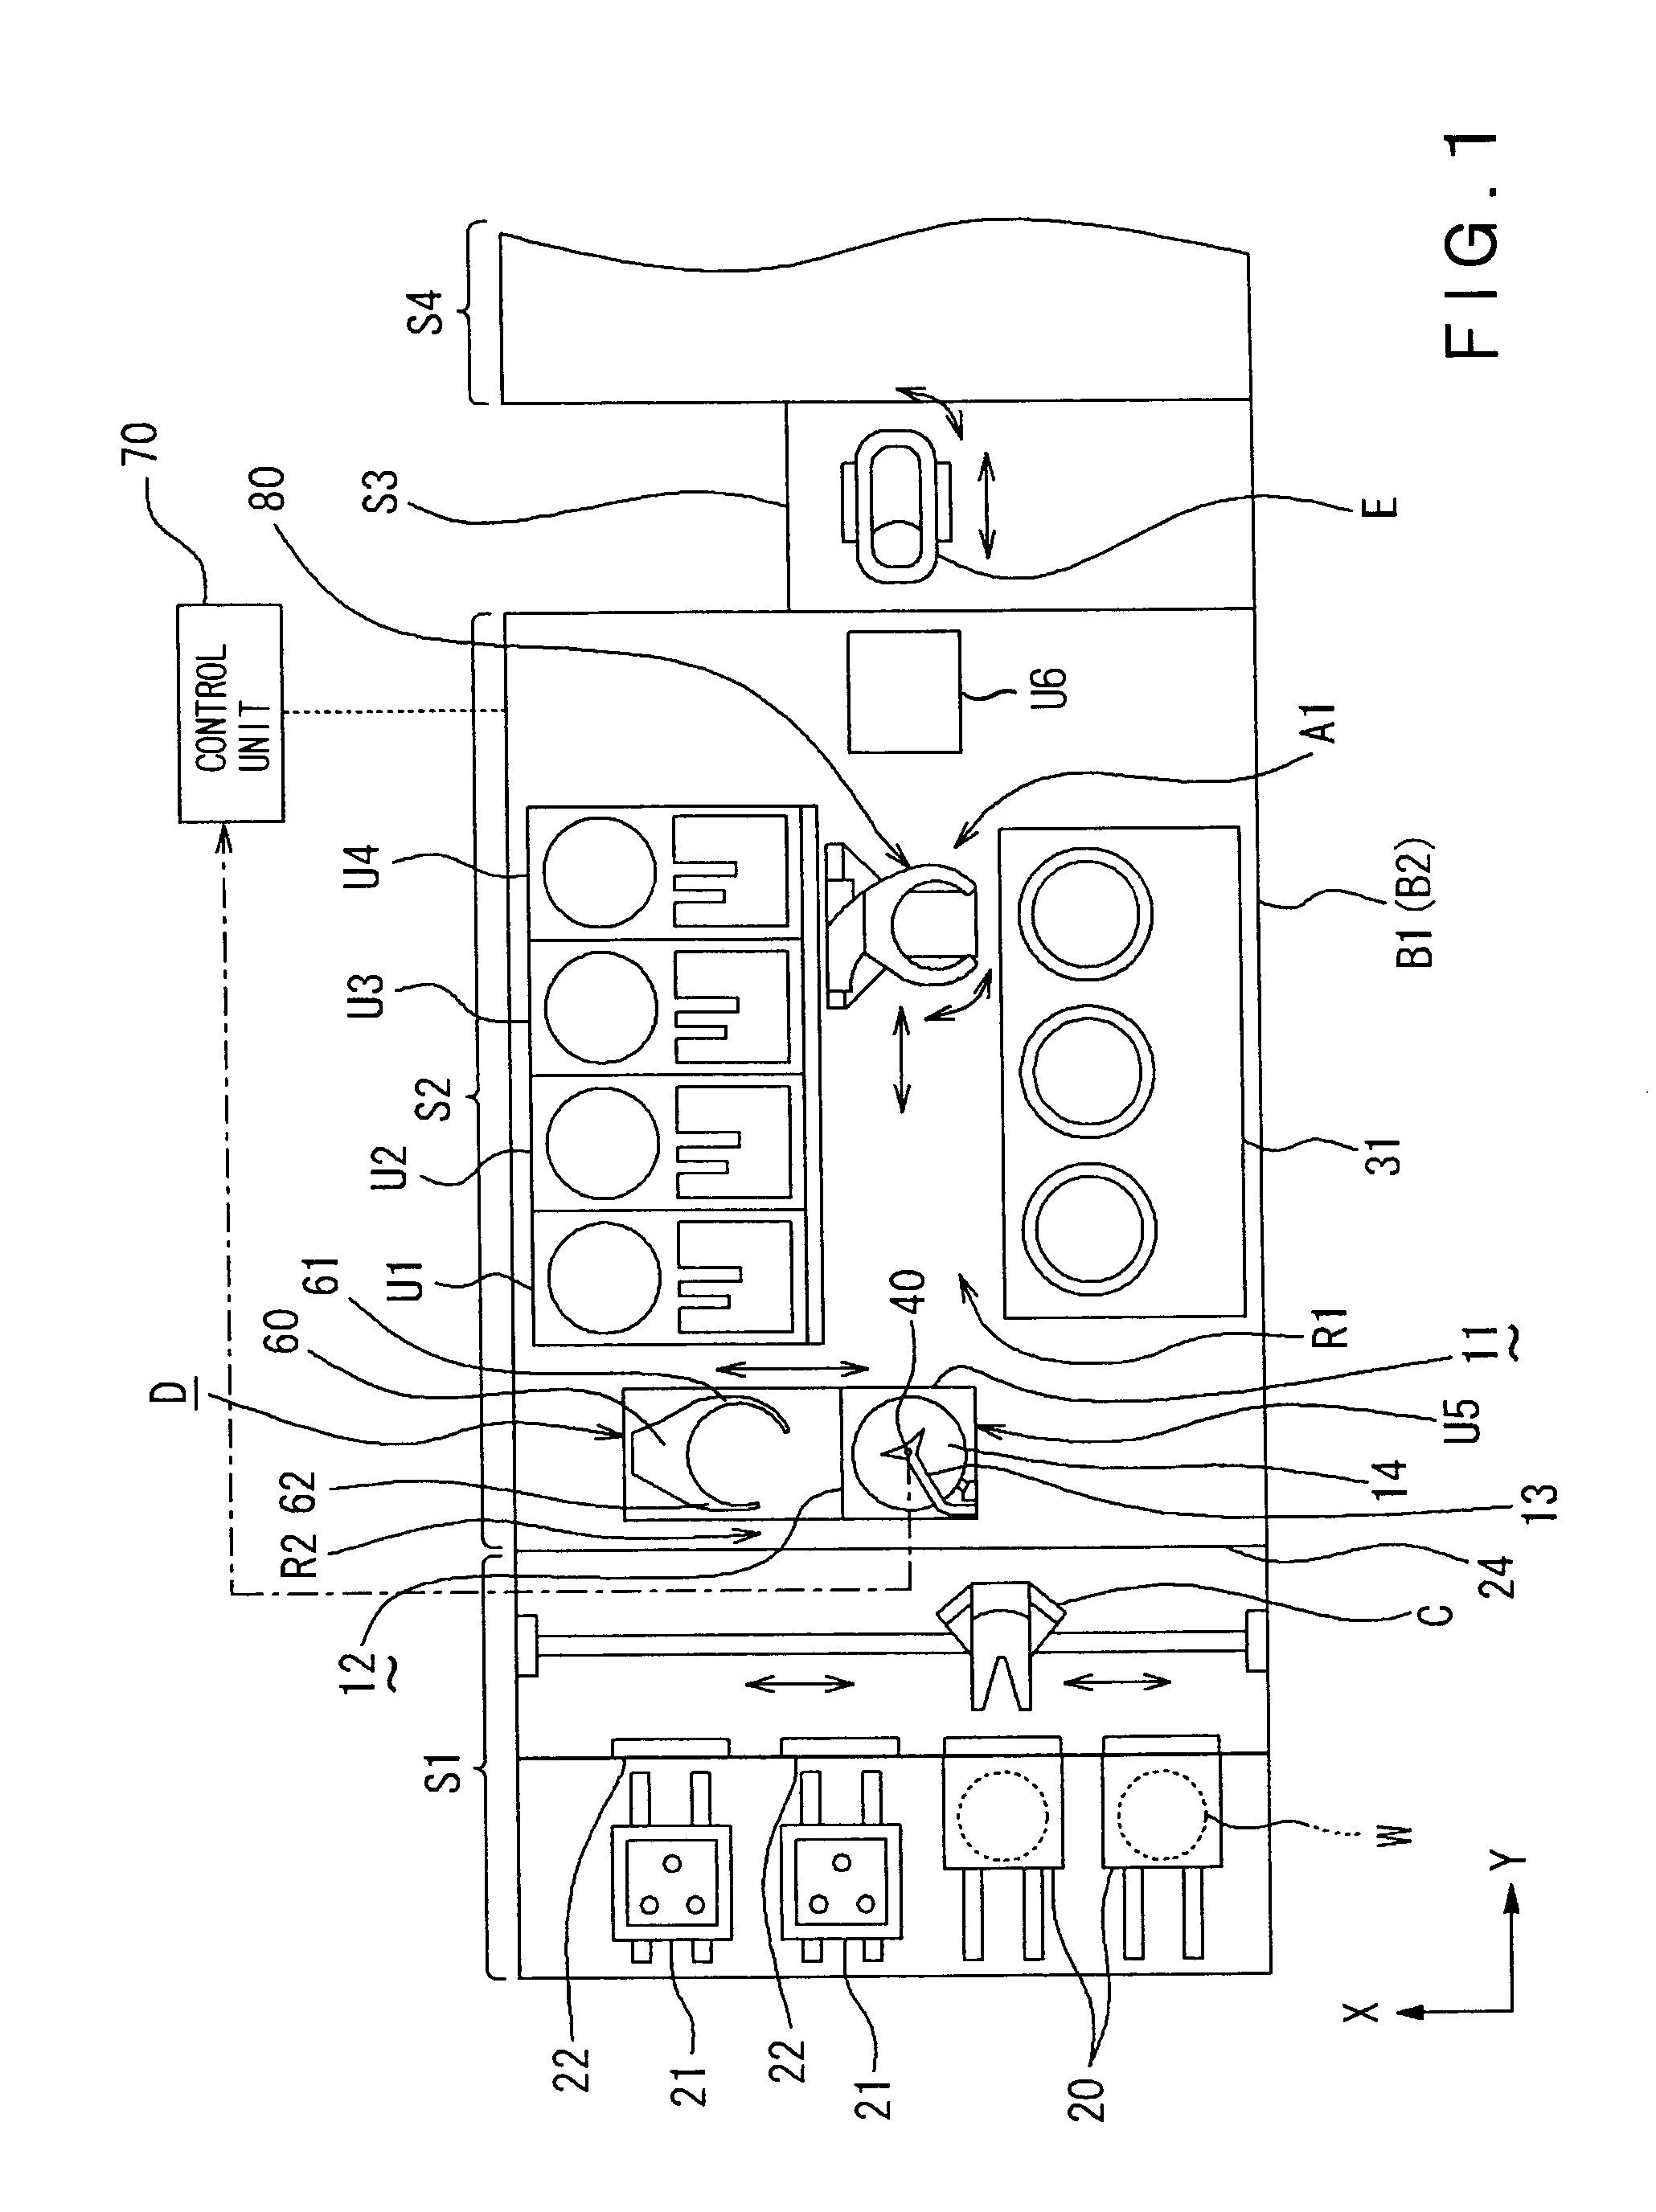 Substrate carrying and processing apparatus